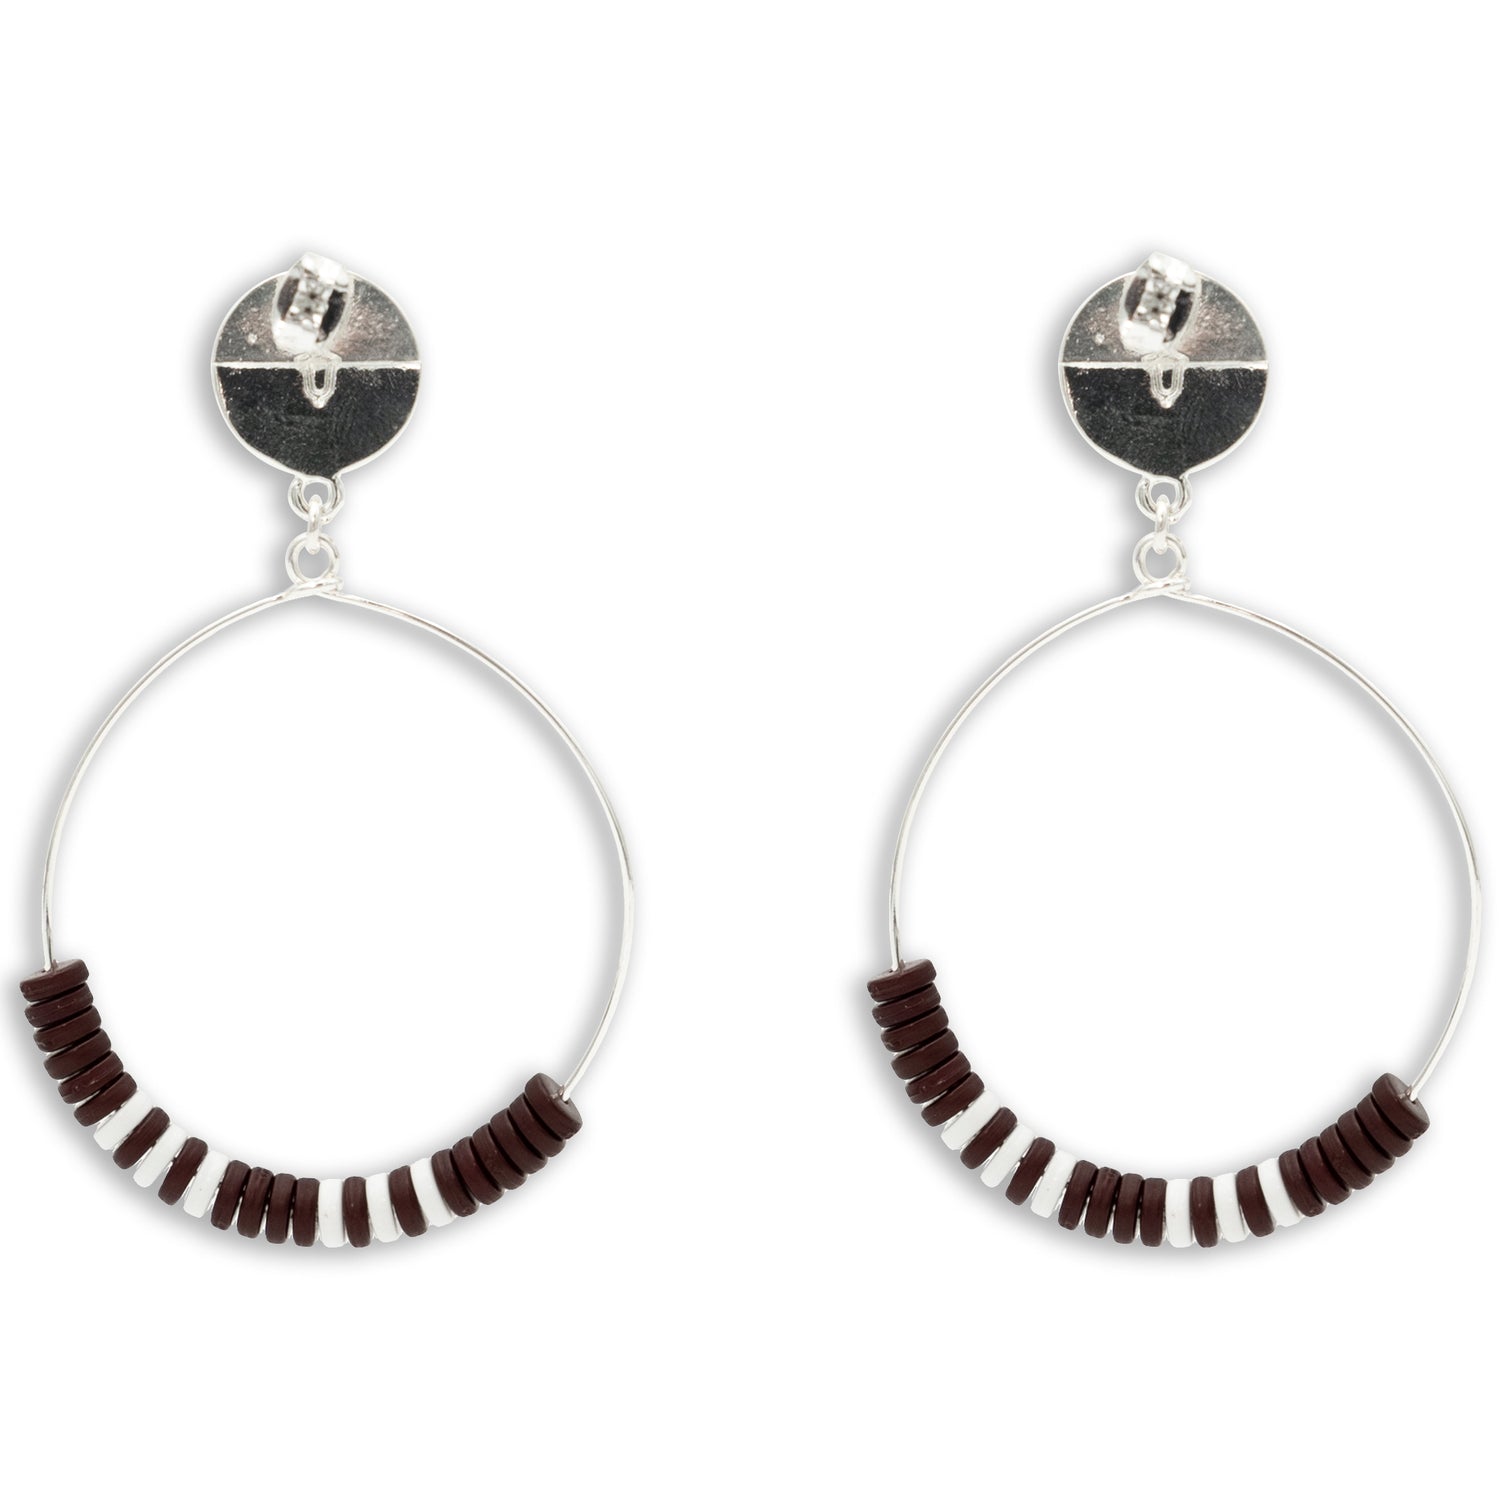 Texas A&M Maroon And White Beaded Silver Hoop Earrings